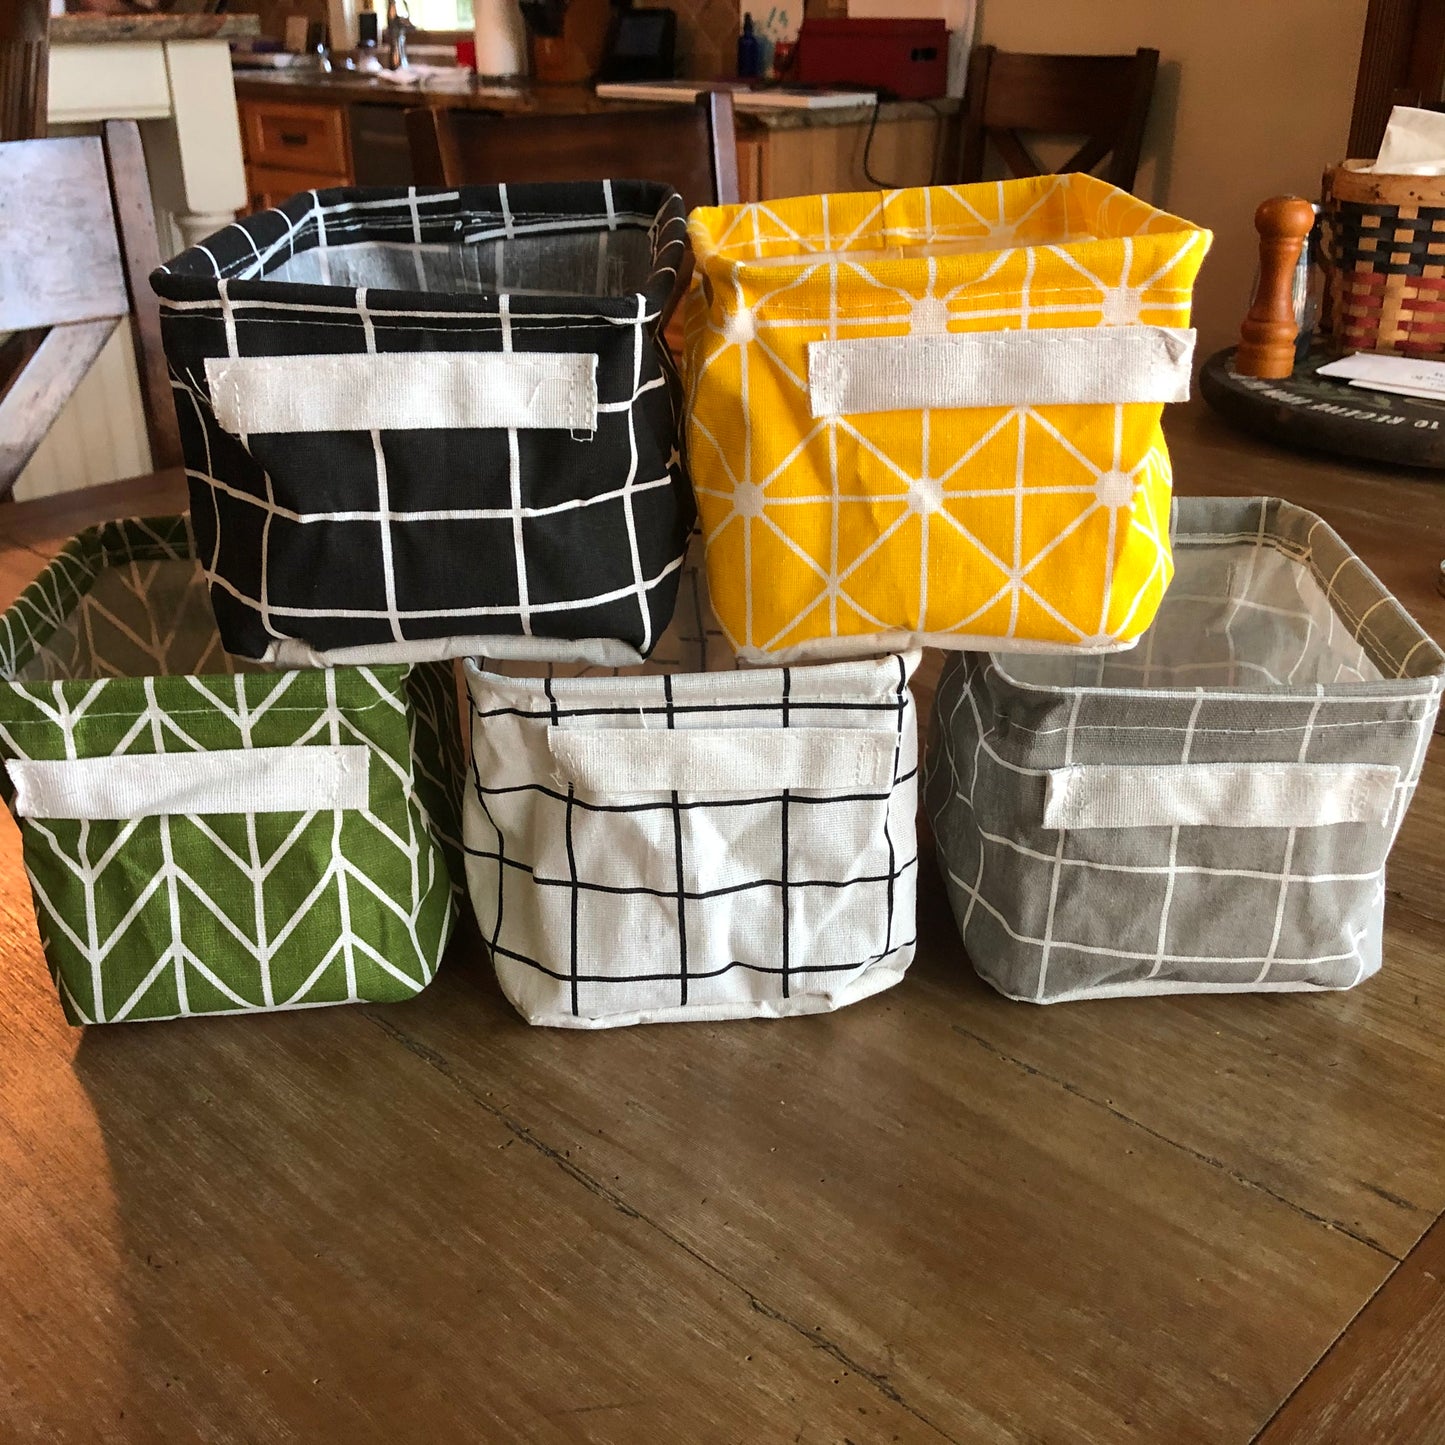 A close up of the different basket colors available for the "Just Because" gift basket 